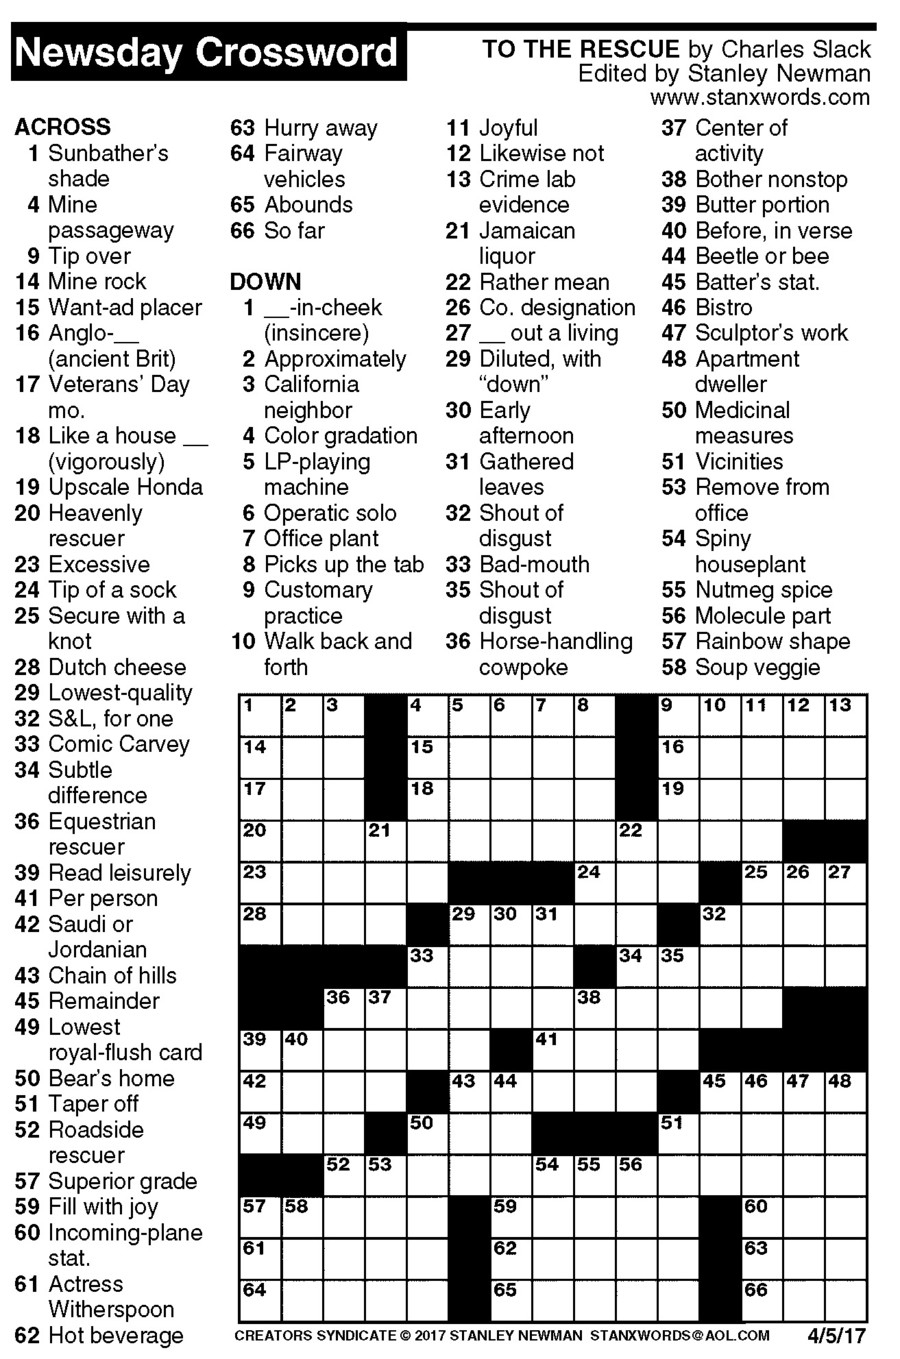 Newsday Crossword Puzzle For Apr 05, 2017,stanley Newman - Printable Crossword Newsday